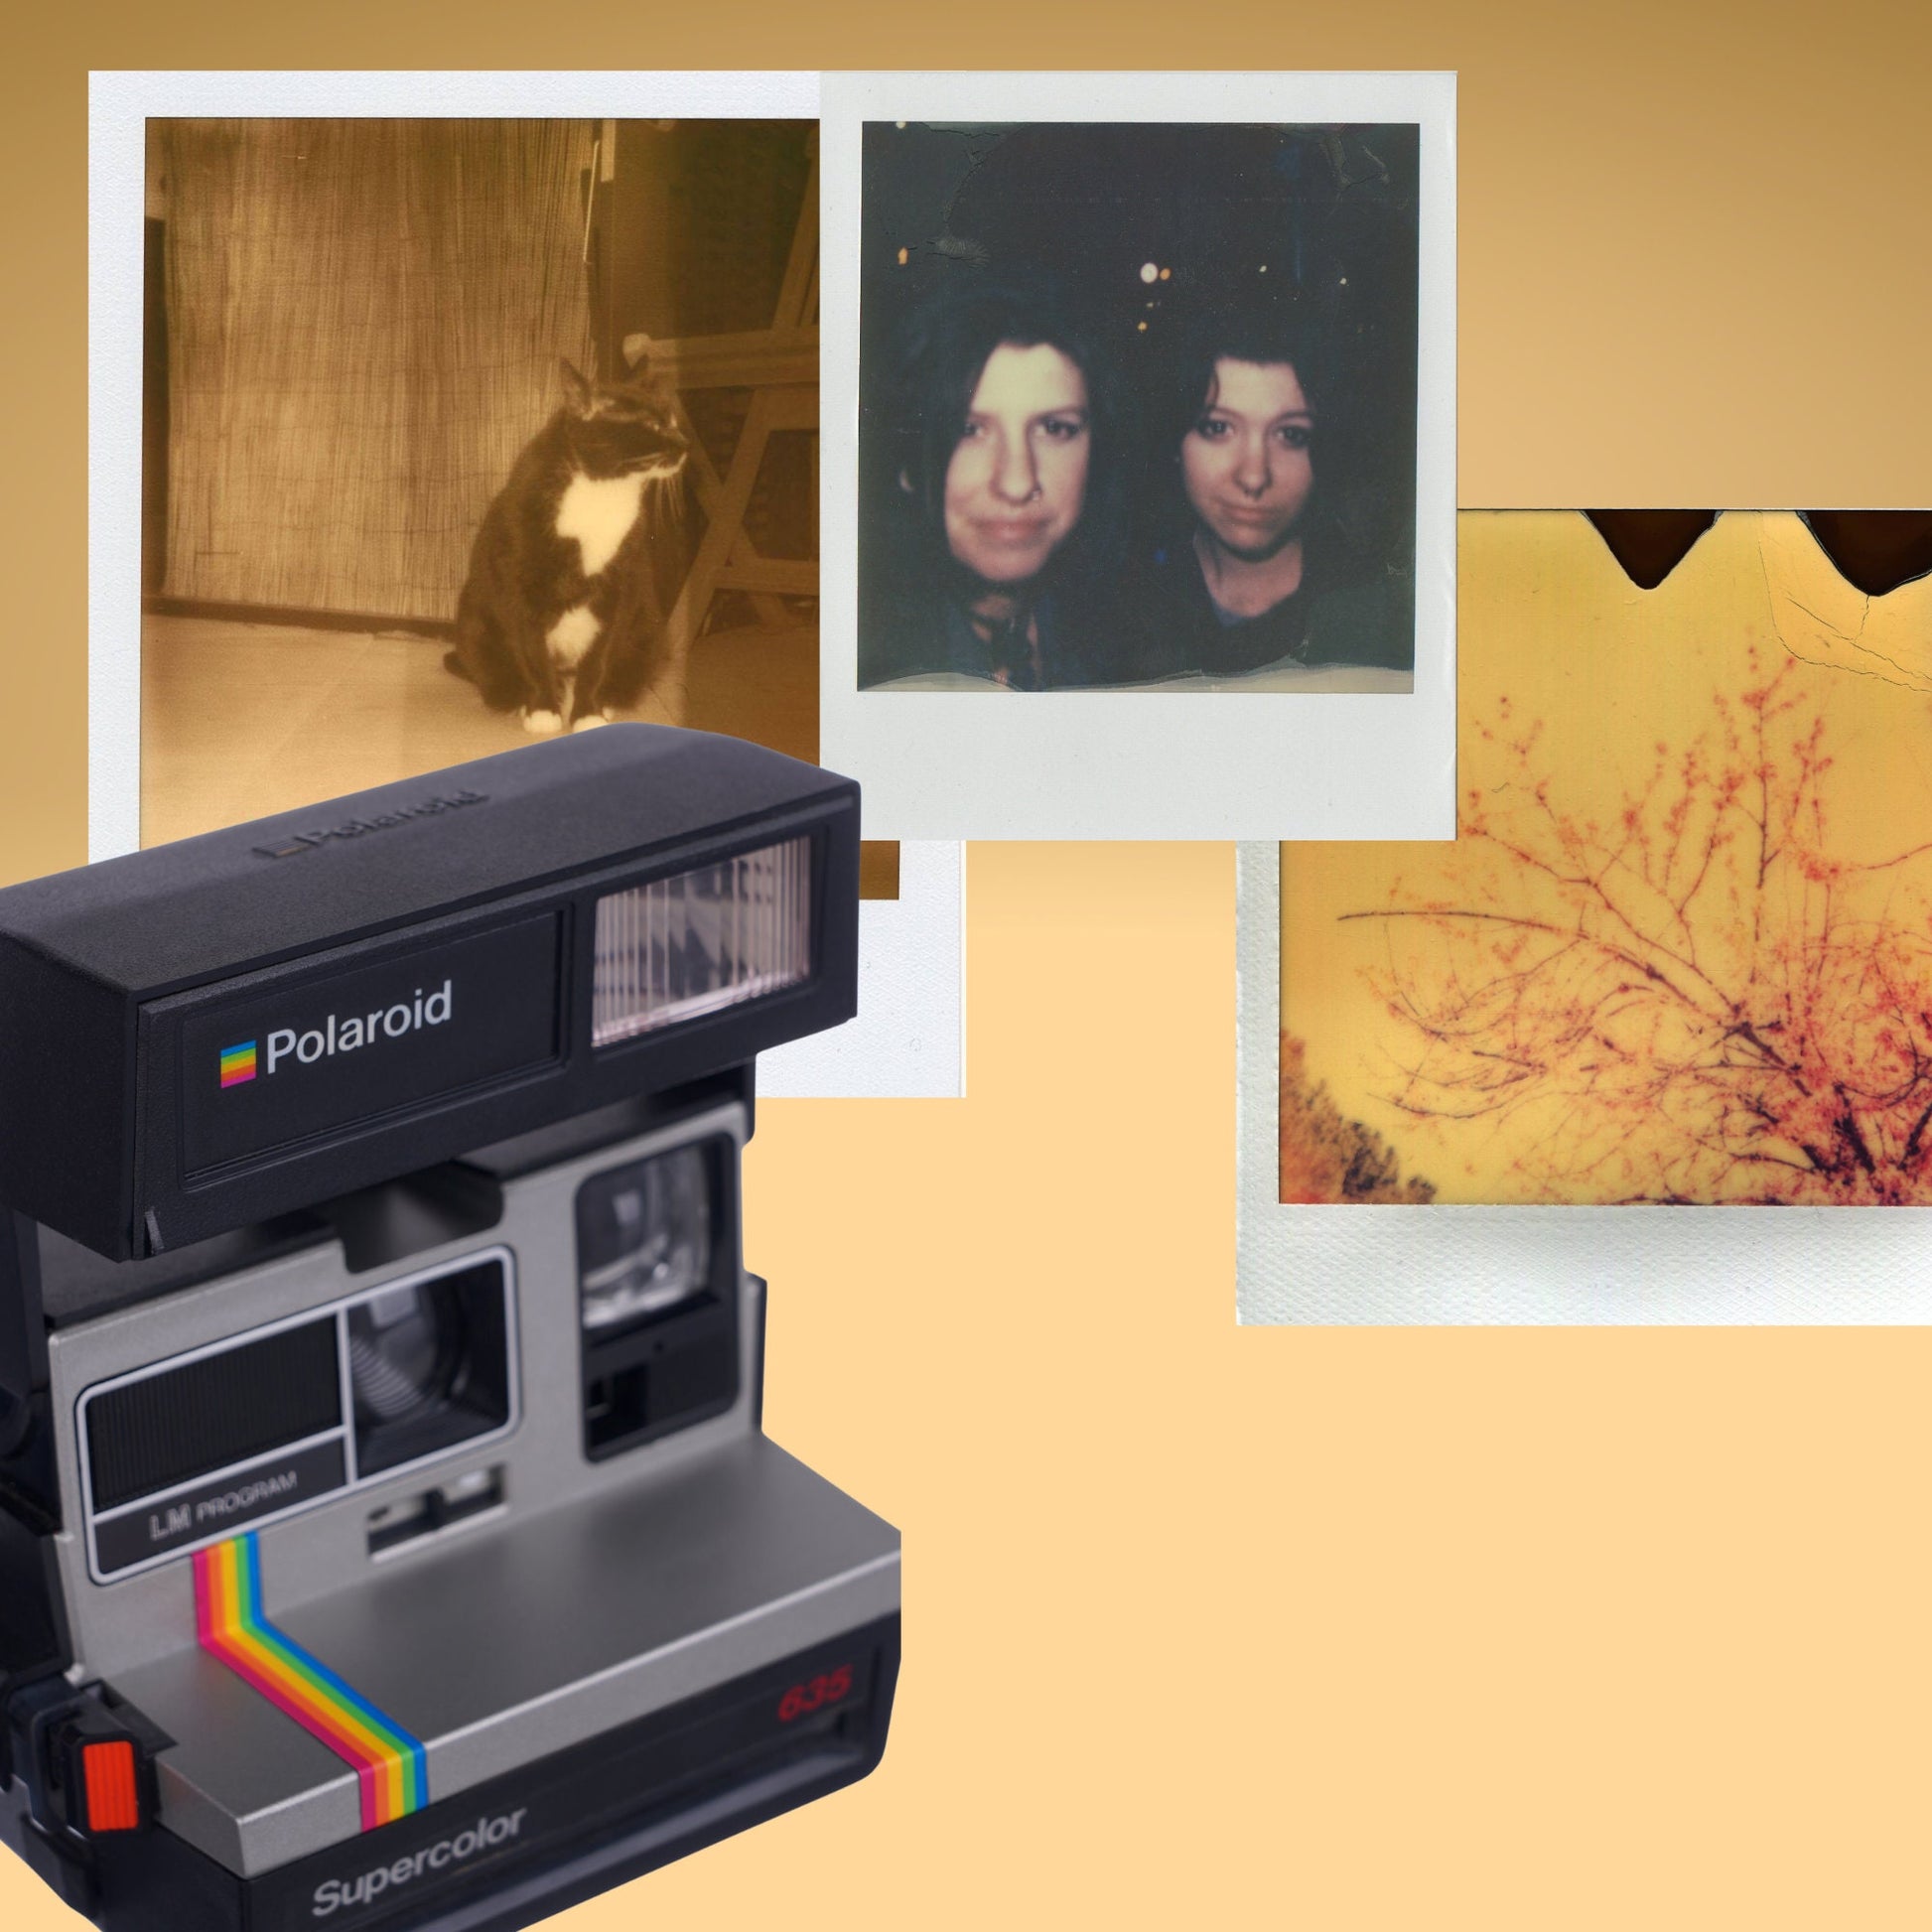 Say Cheese! Capture Memories in Style with the Polaroid Supercolor 635CL Instant Camera - Perfectly Vintage and Ready to Snap! - Vintage Polaroid Instant Cameras